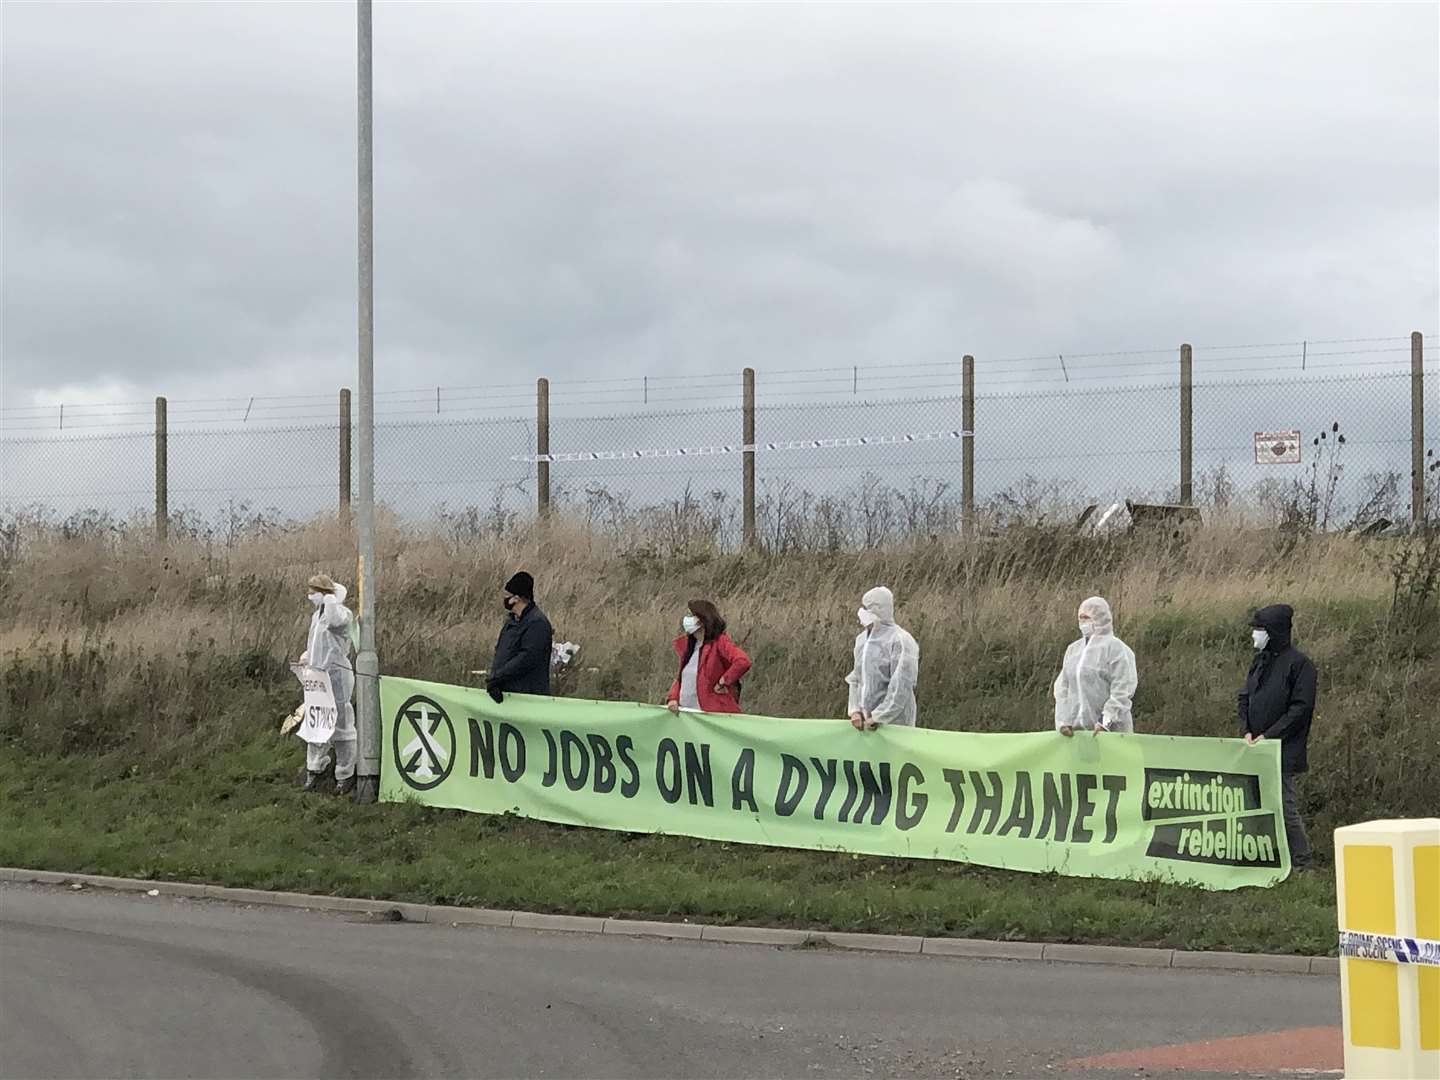 XR Thanet say they received "toots of support" as they held a socially-distanced protest alongside the A299